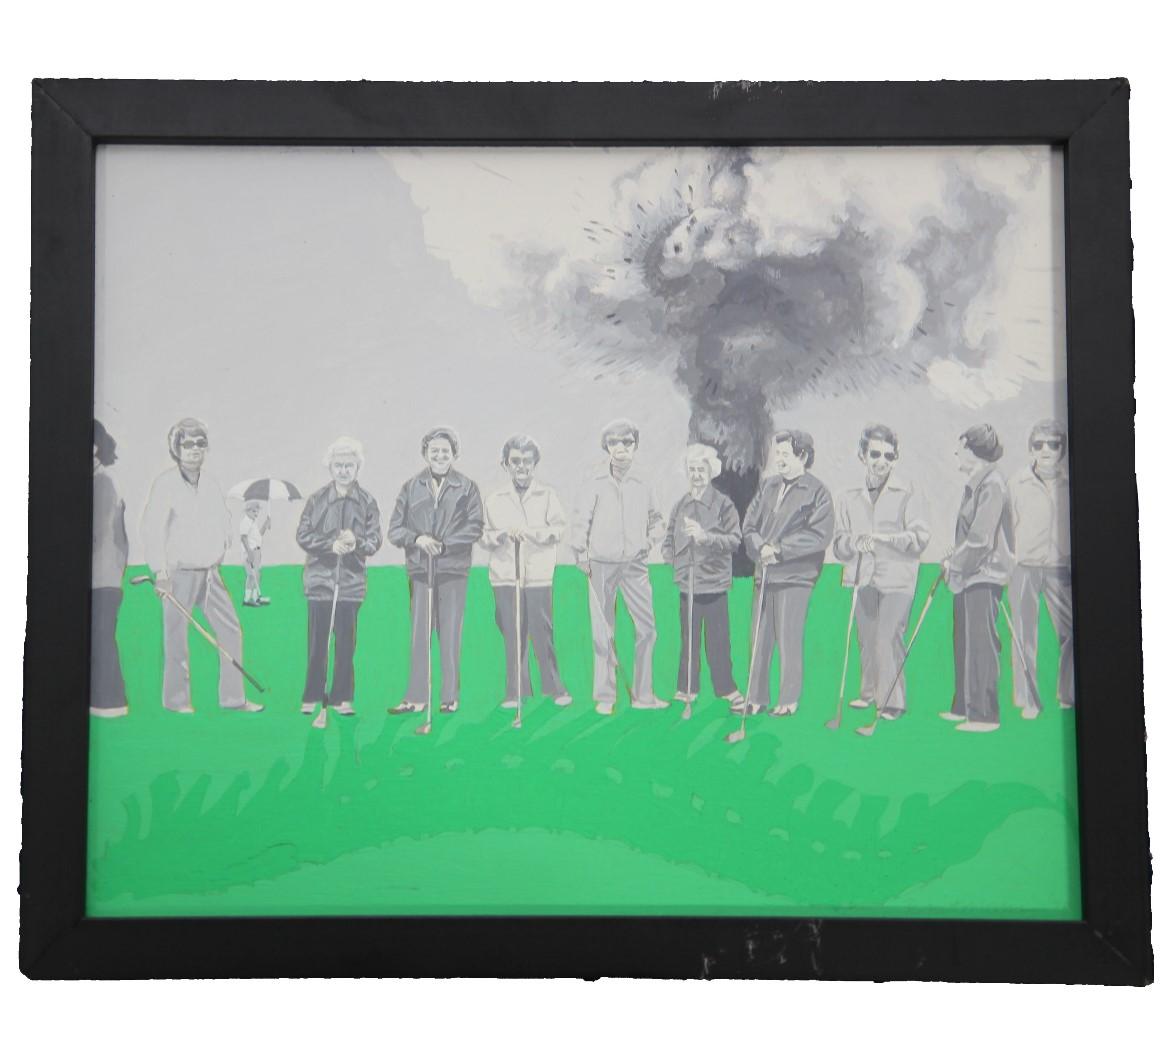 Portrait of a group of individuals standing on a green golf course. In the background, there is a mushroom cloud rising up over the group. The work is signed by the artist. It is titled and dated by the artist as well. The board is framed in a black